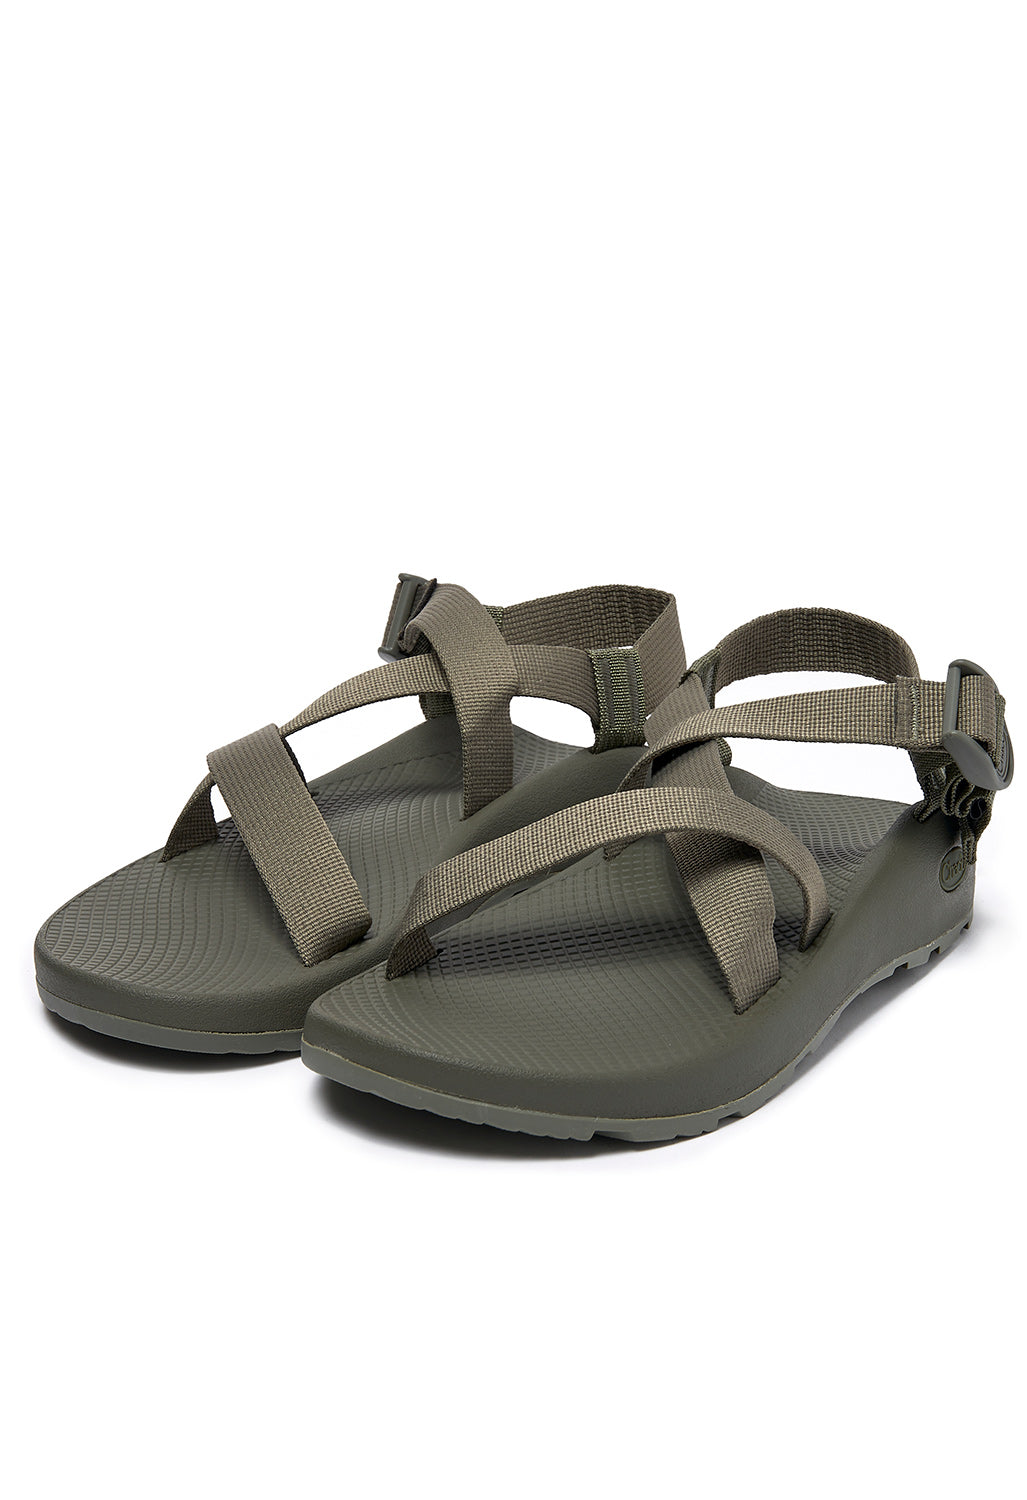 Chaco Men's Z1 Classic Sandals - Olive Night